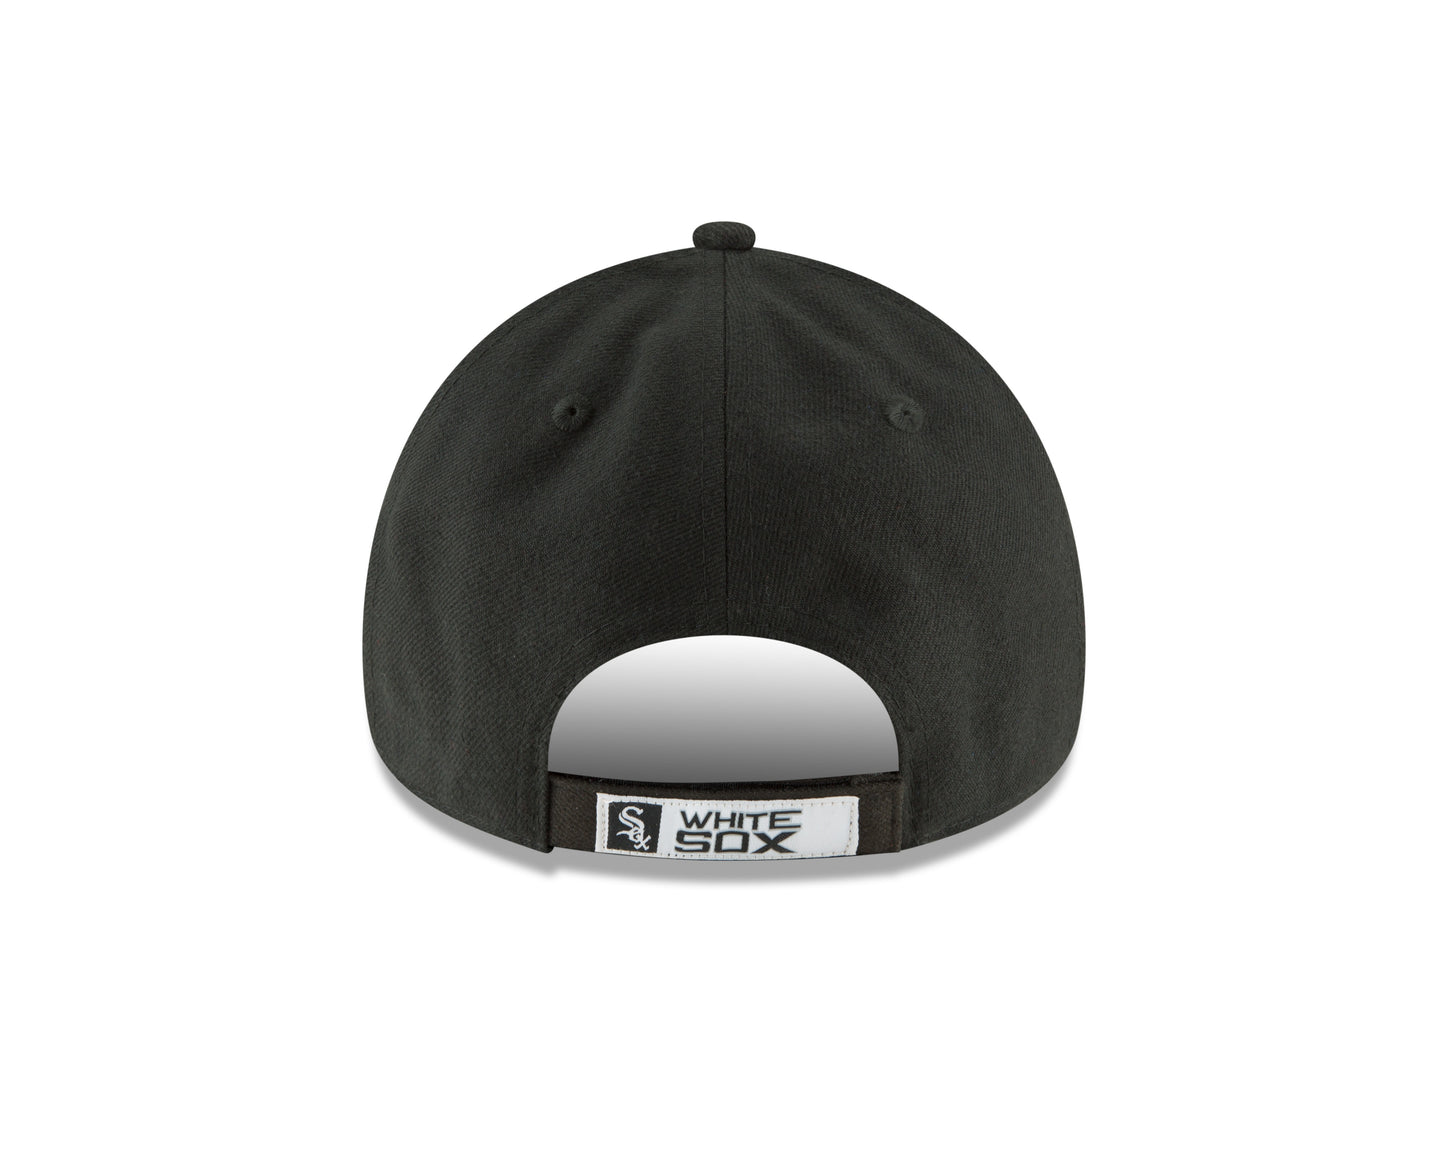 Chicago White Sox New Era  9/11 Memorial 9forty Hat